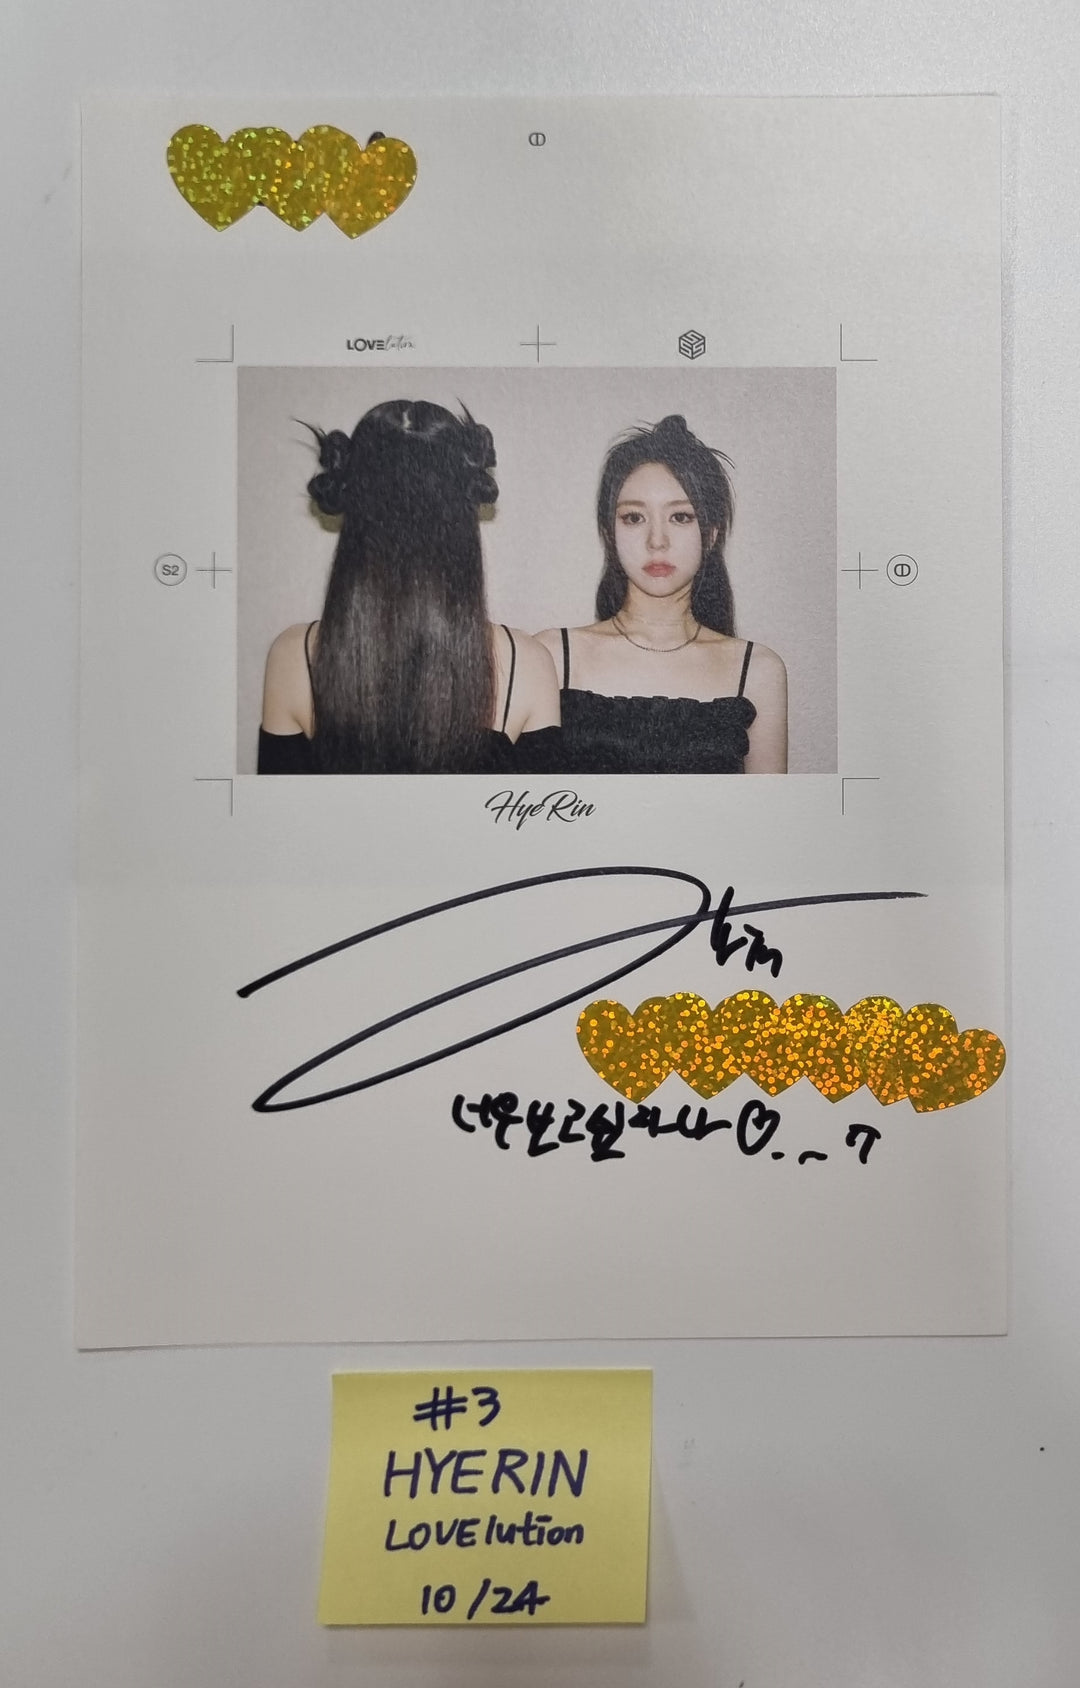 TripleS "LOVElution : MUHAN" - A Cut Page From Fansign Event Album [23.10.25]